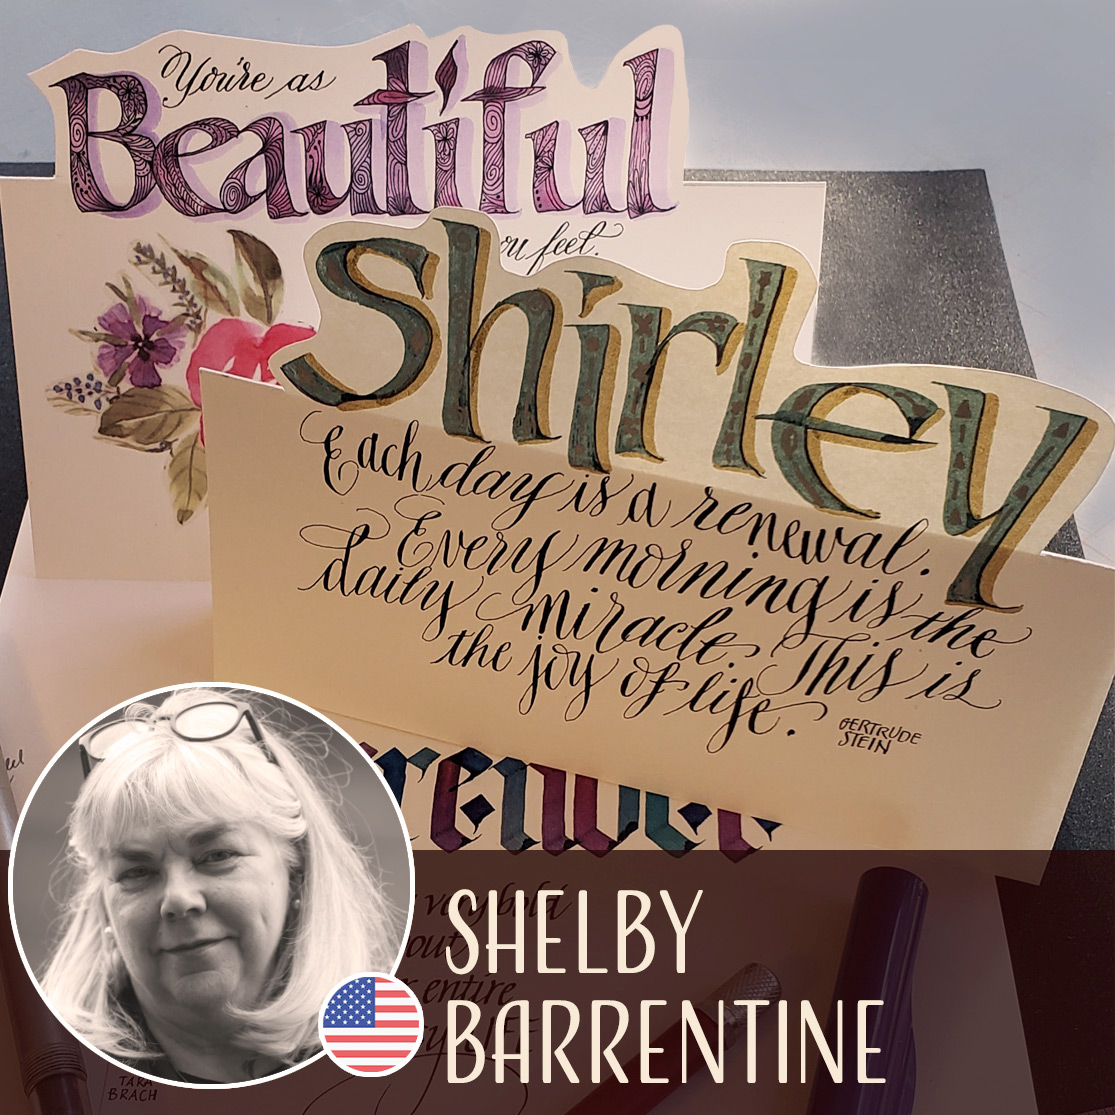 Shelby Barrentine